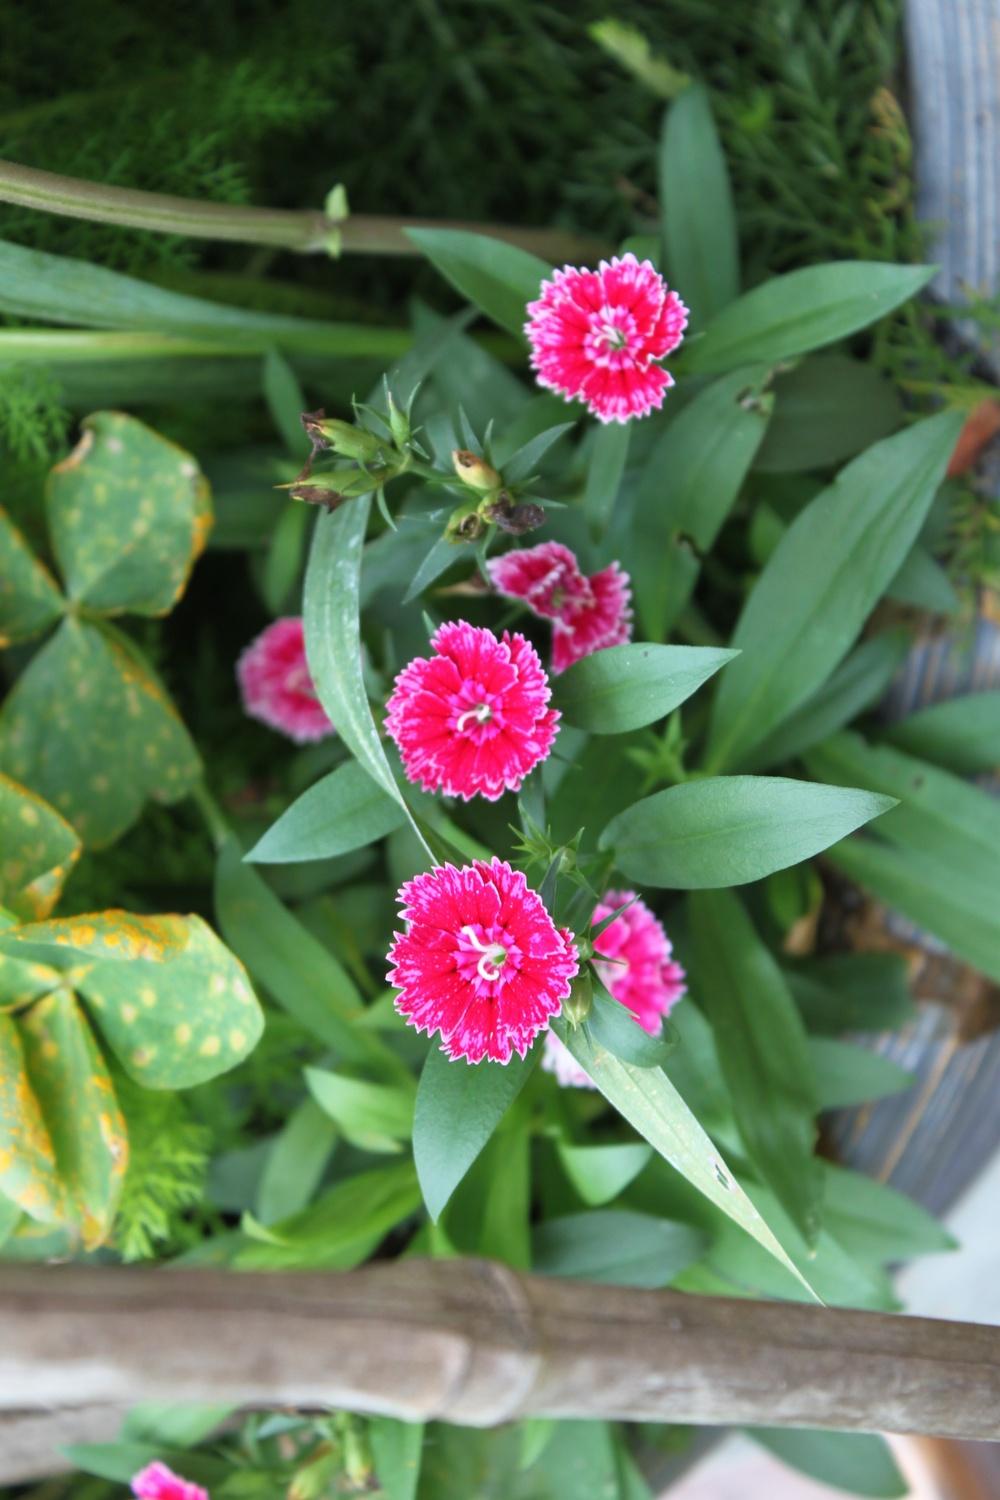 Photo of Dianthus uploaded by DaisyRyder